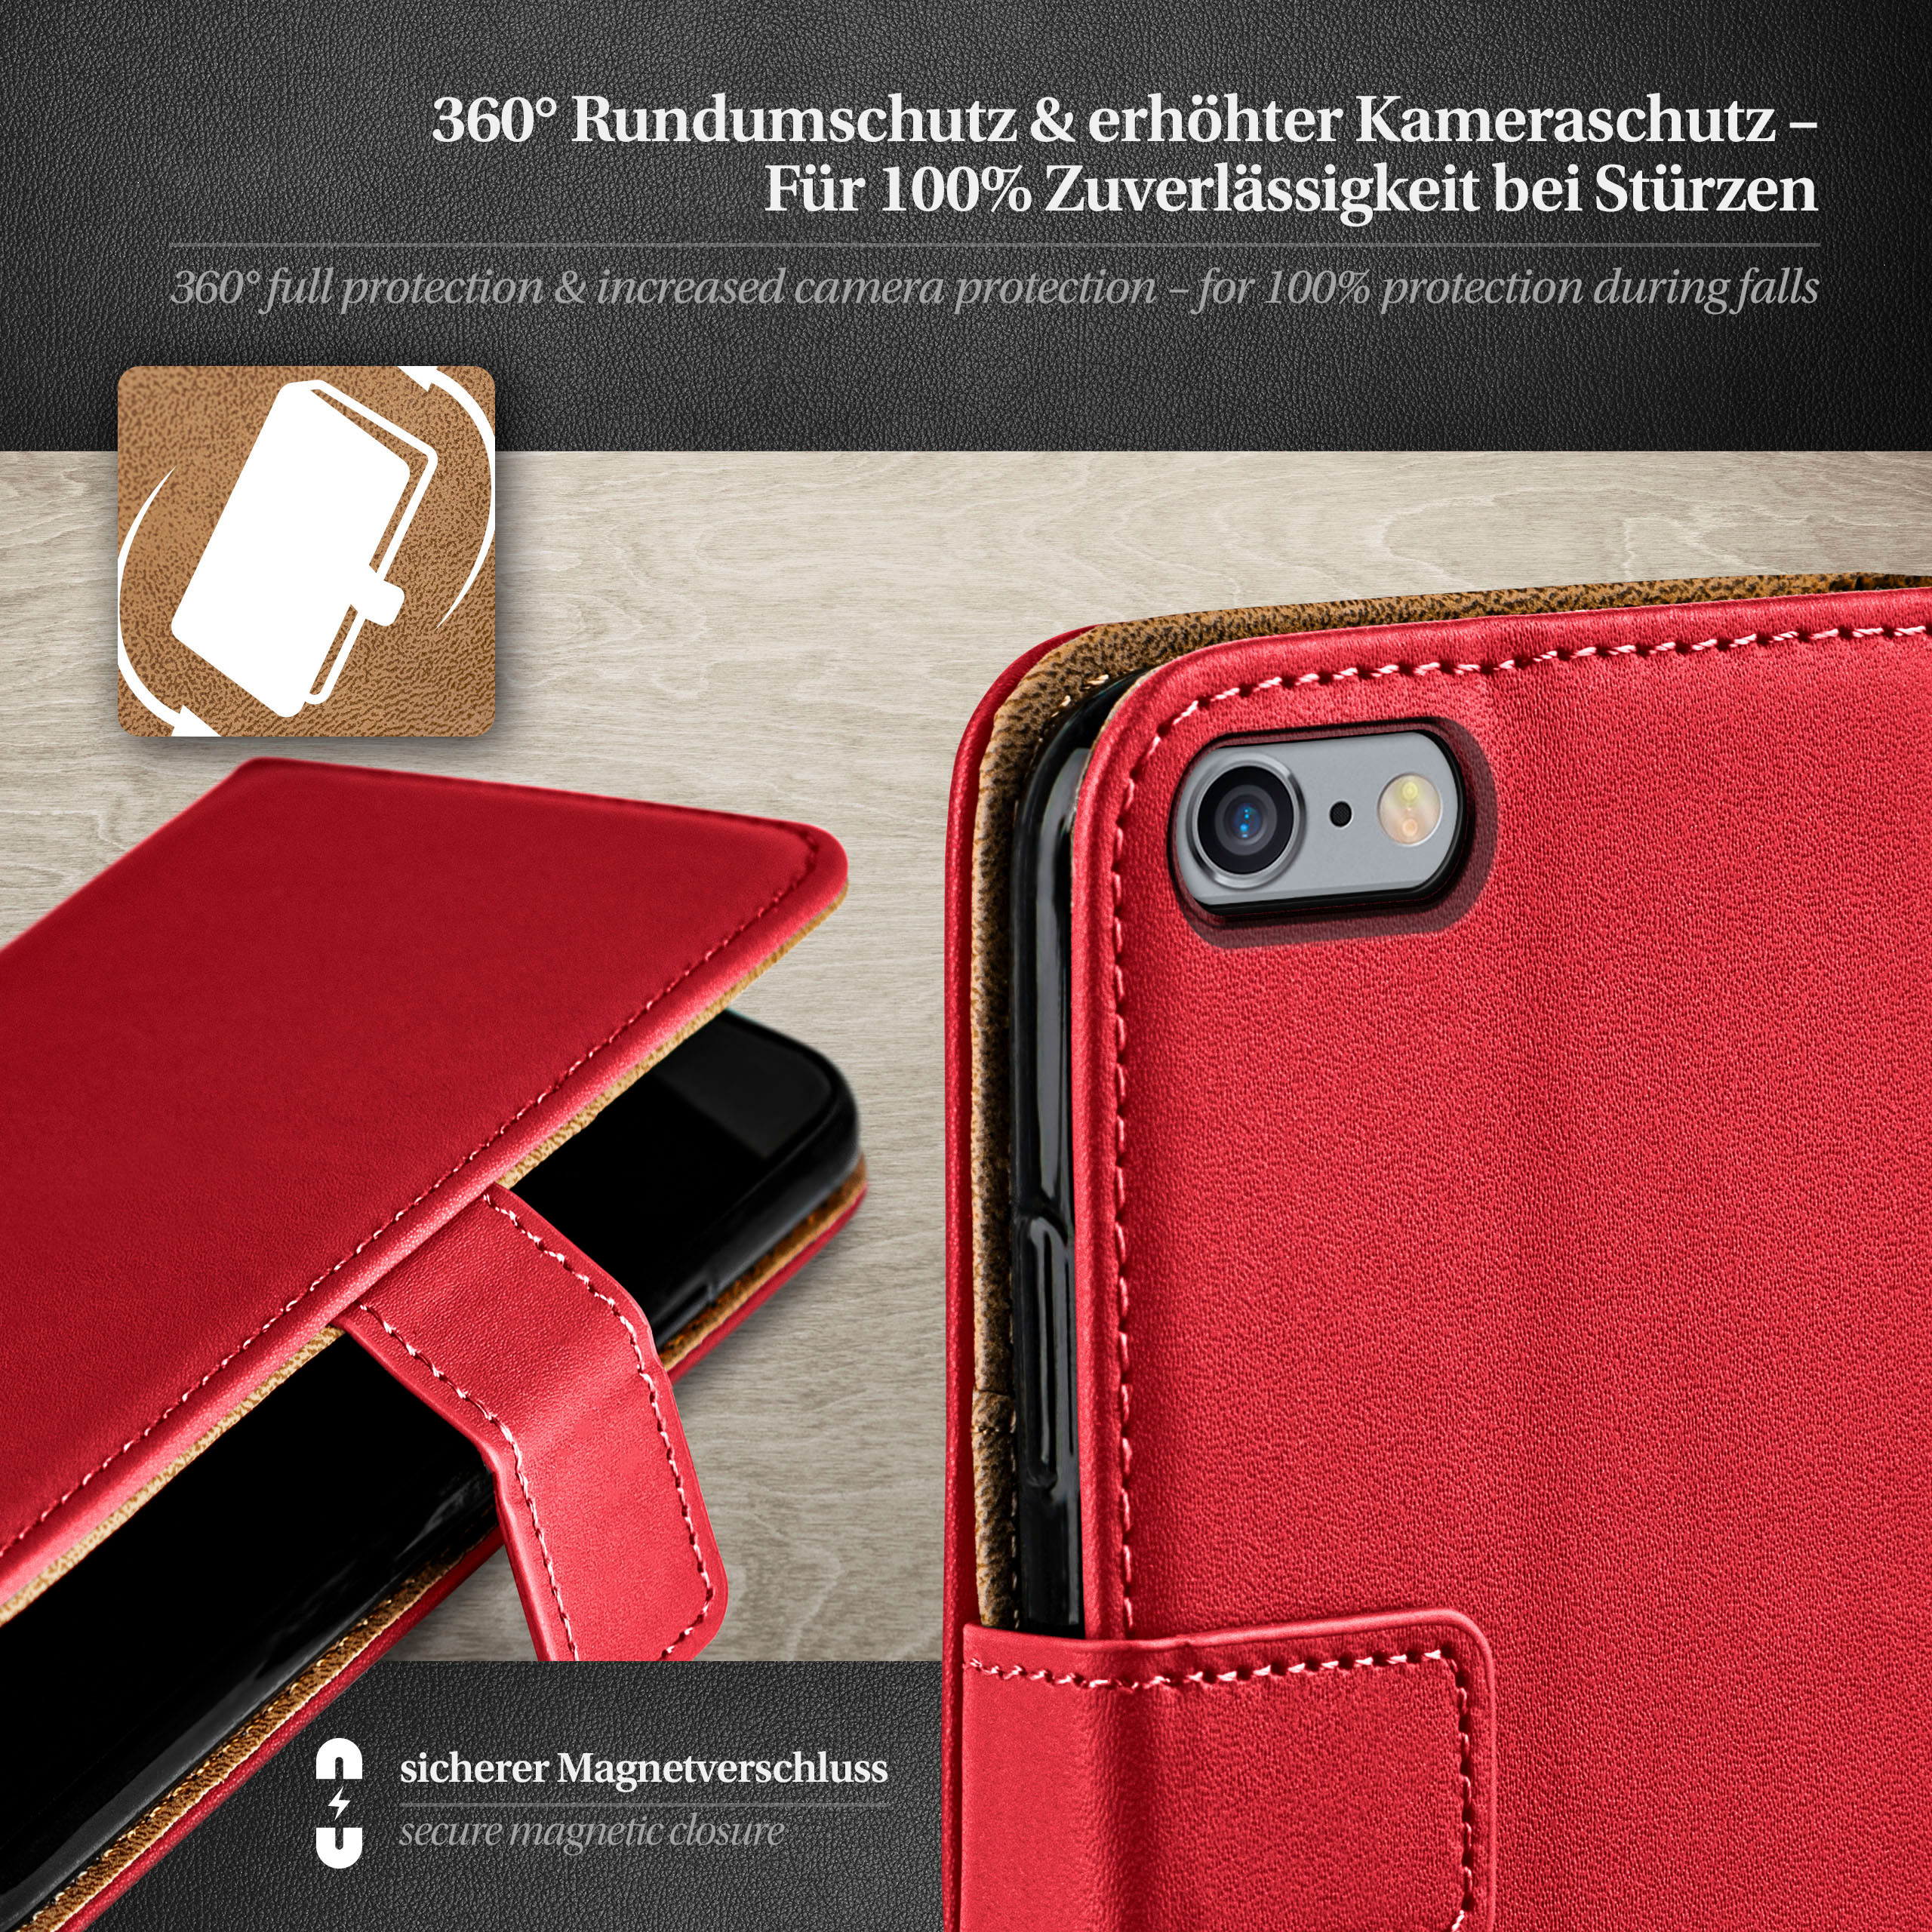 Blazing-Red Case, Apple, Bookcover, MOEX iPhone 6, / Book 6s iPhone